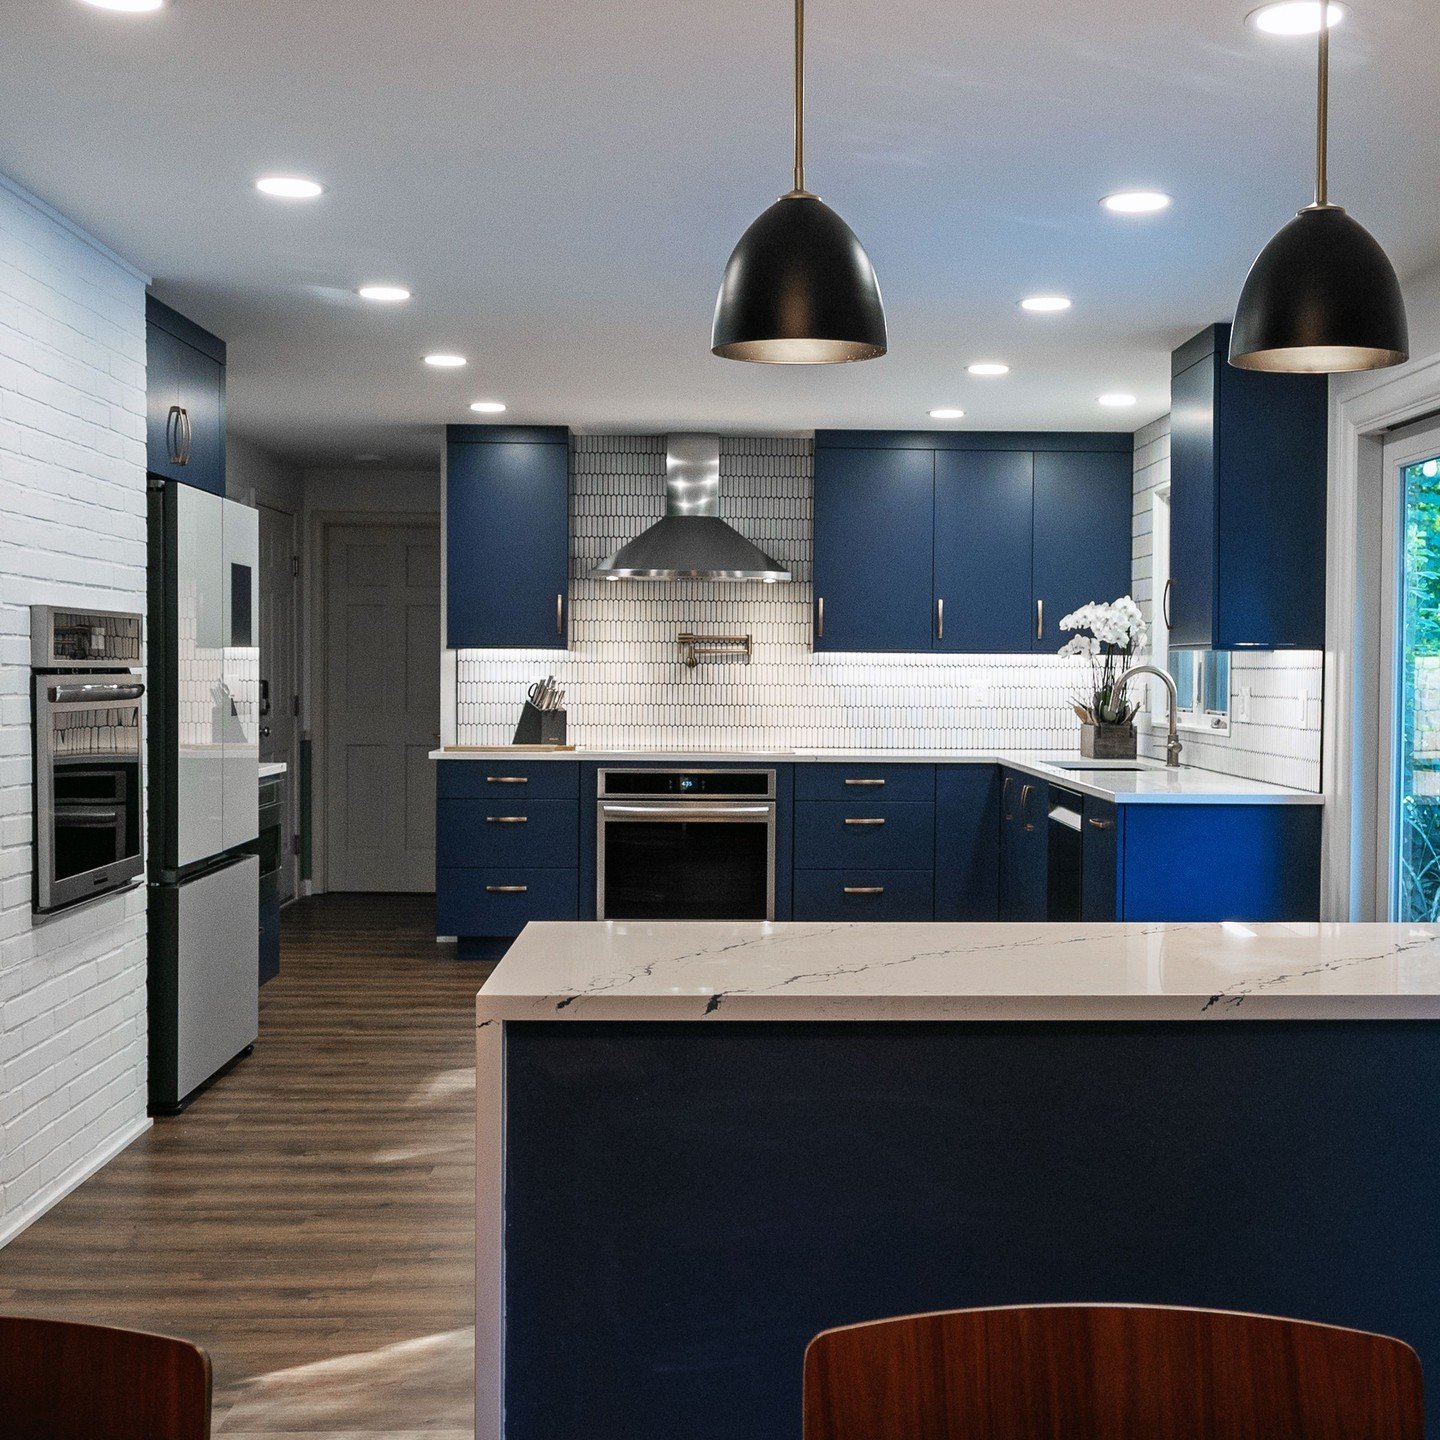 Just one more peek, because we know you love it as much as we do! Dive into the elegance of this kitchen, where the bold blue cabinets and chic black pendant lights strike the perfect balance with the minimalist white tiles. This space is more than j